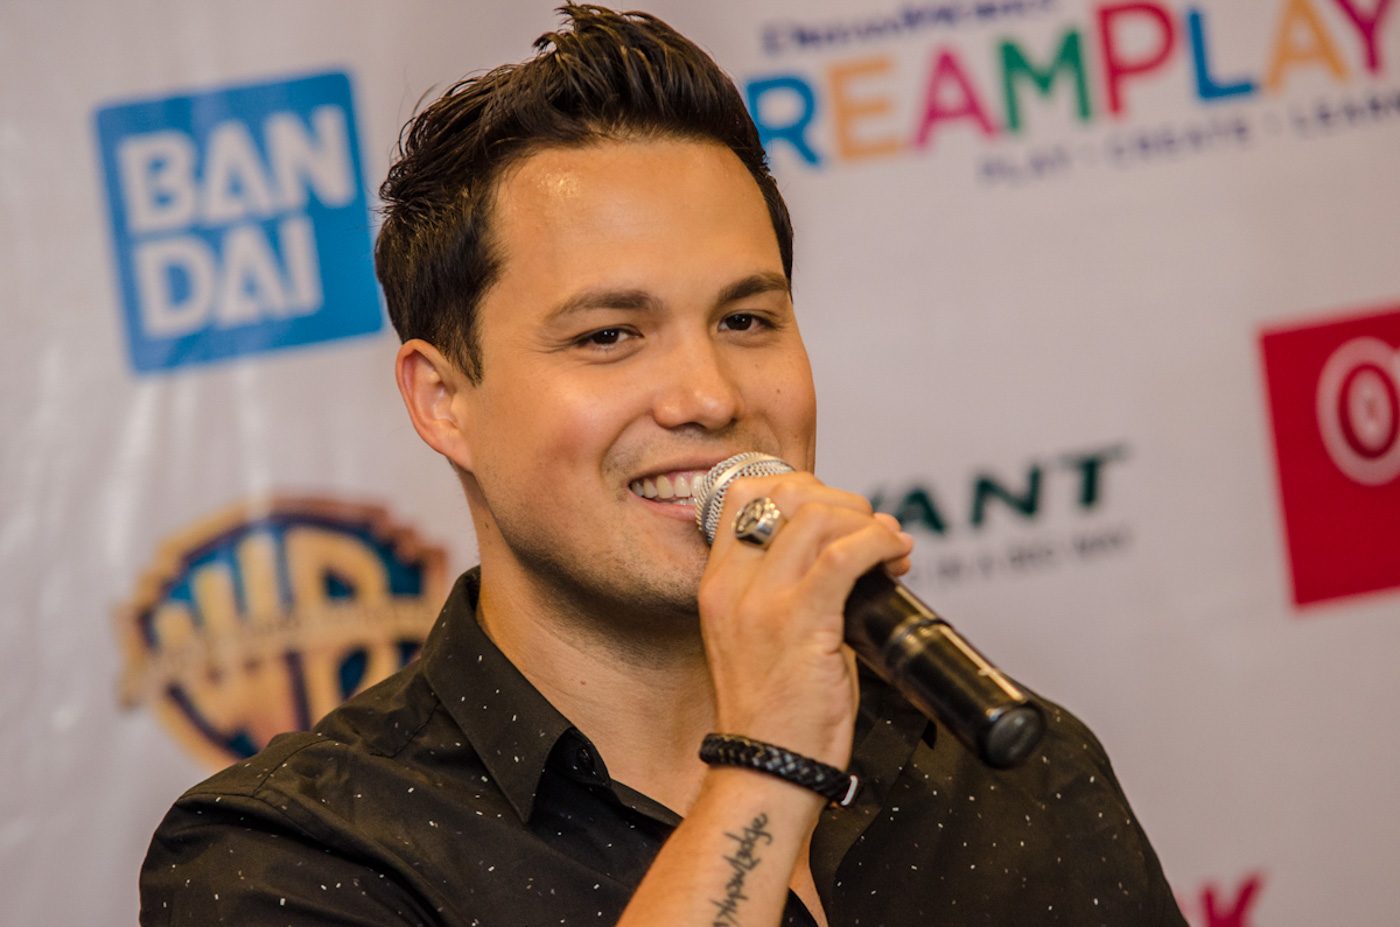 BLUE RANGER. Michael Copon is known for his roles in 'Power Rangers: Time Force' and 'One Tree Hill' 